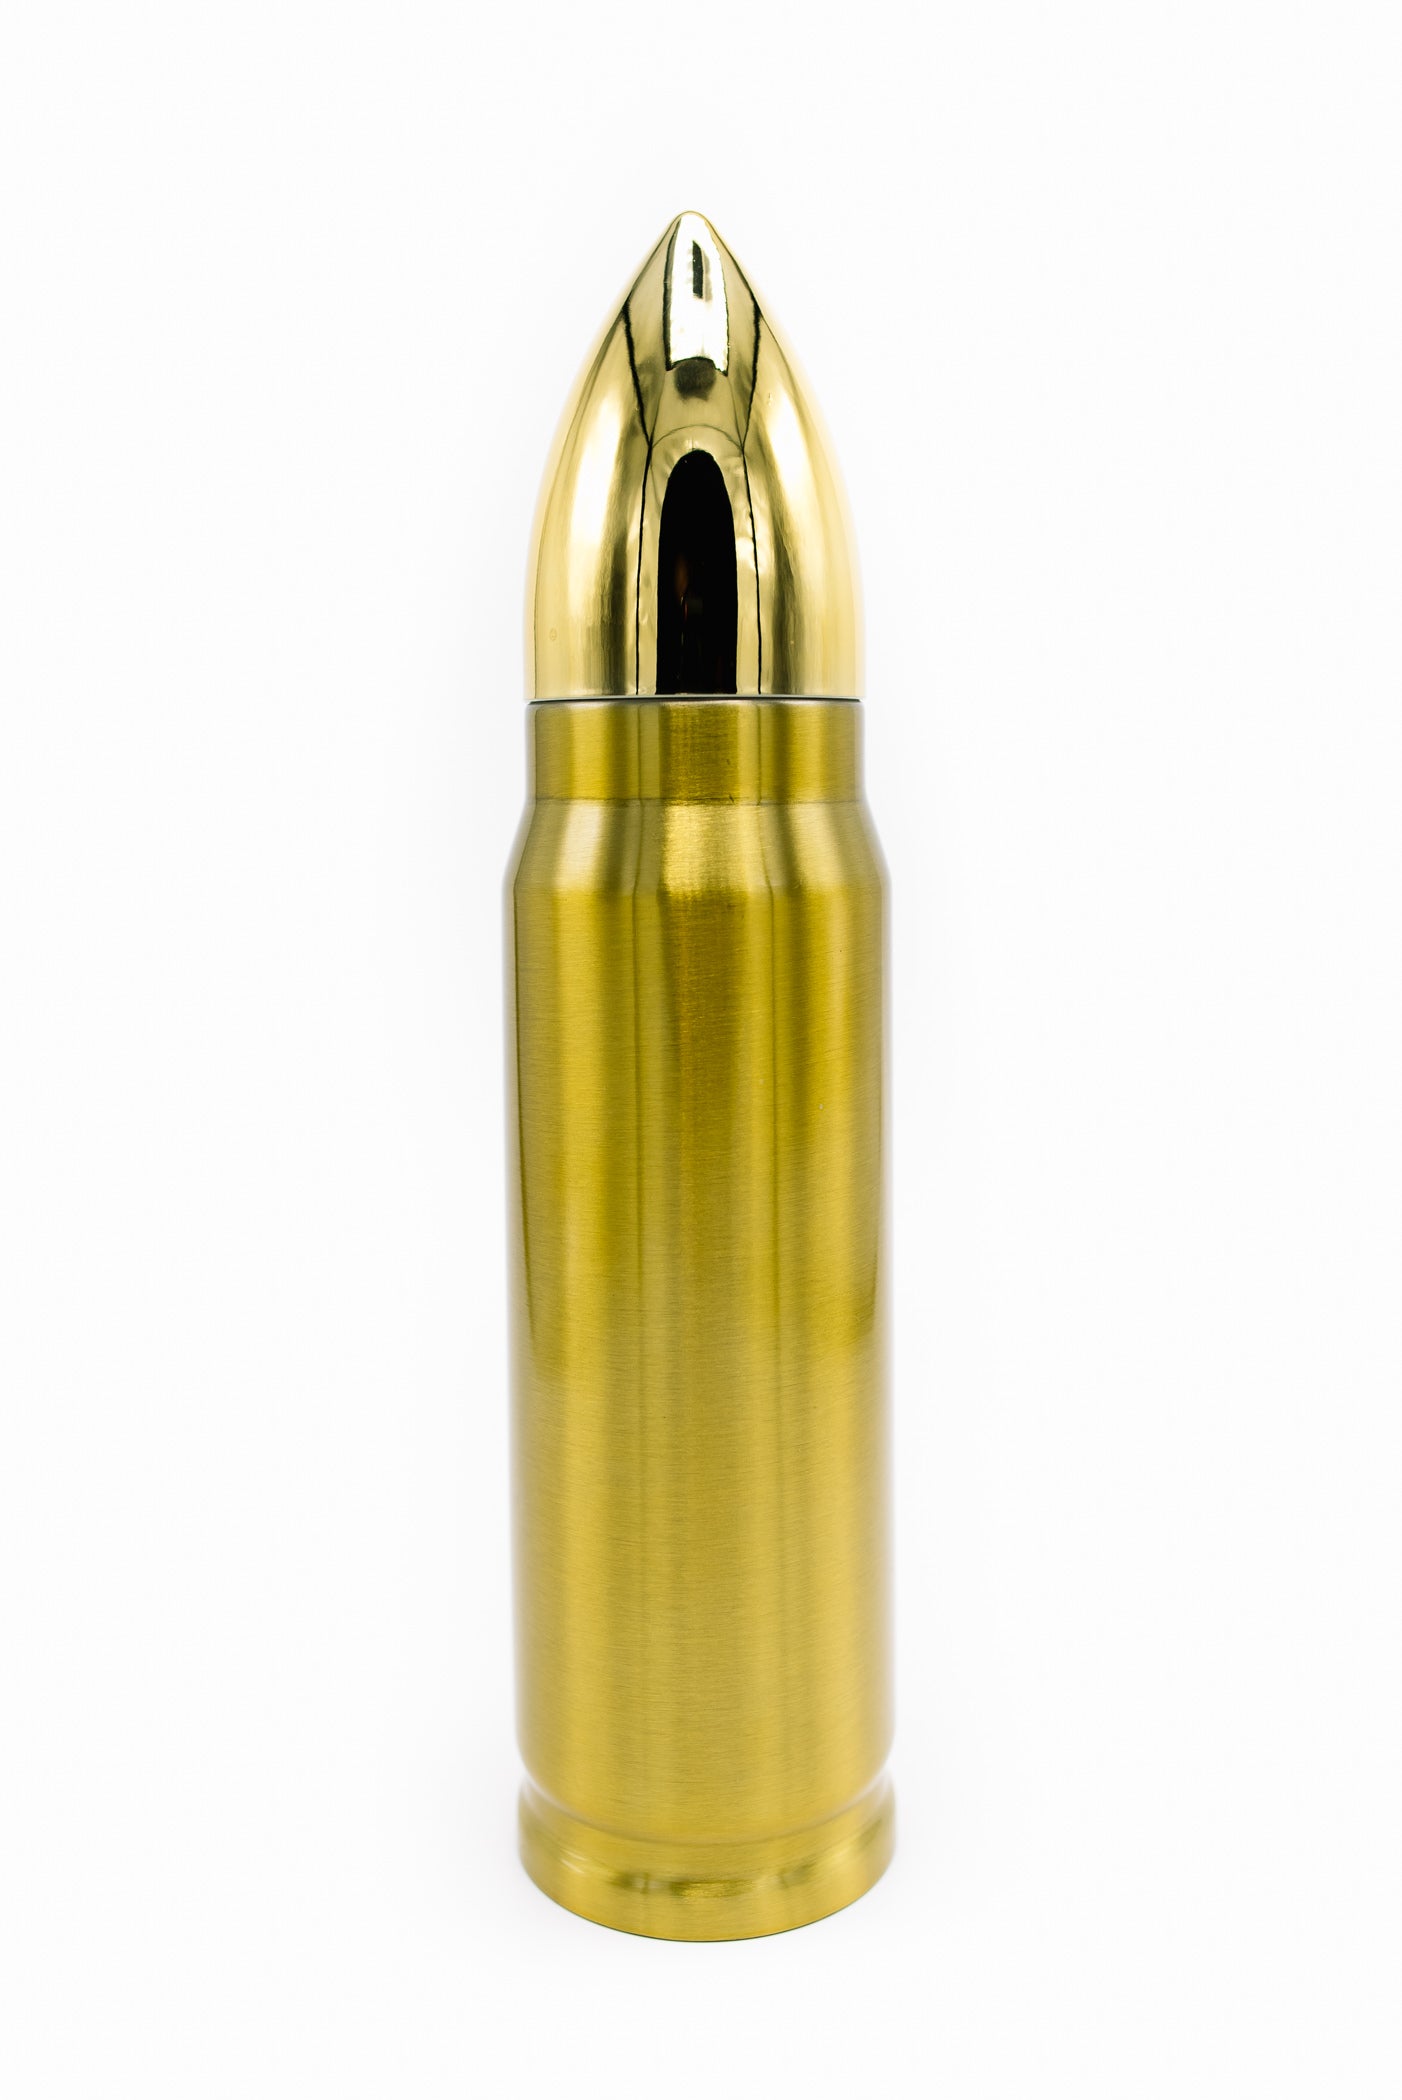 1 L SHOTGUN SHELL THERMOS Coffee Hunting Hot Insulated Stainless Steel Mug  Flask